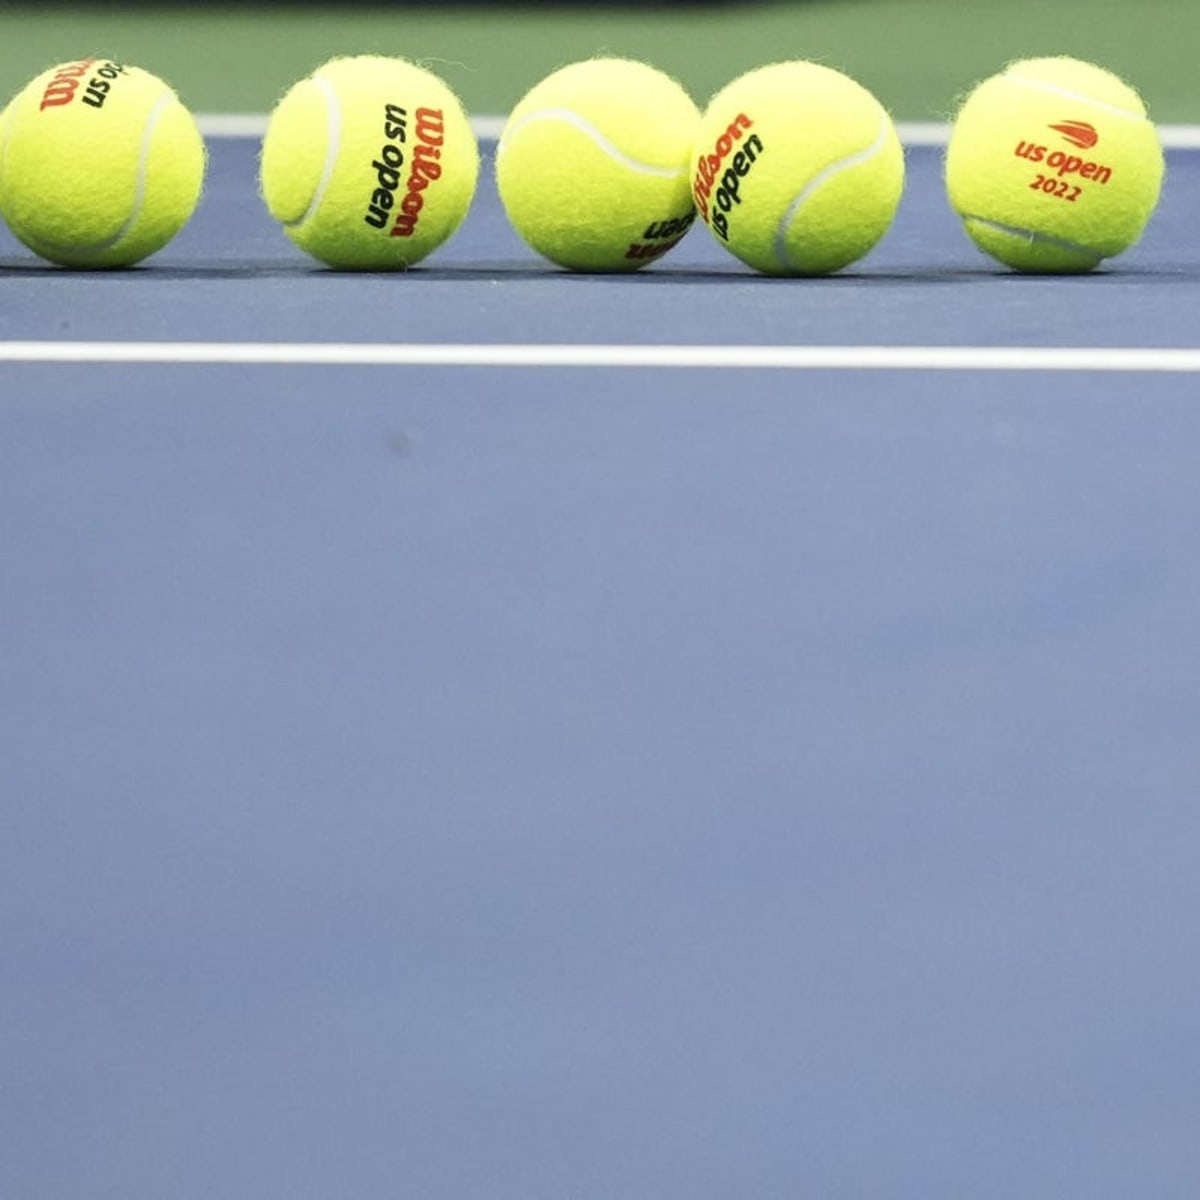 Watch Mutua Madrid Open ATP final Stream tennis live, TV channel - How to Watch and Stream Major League and College Sports